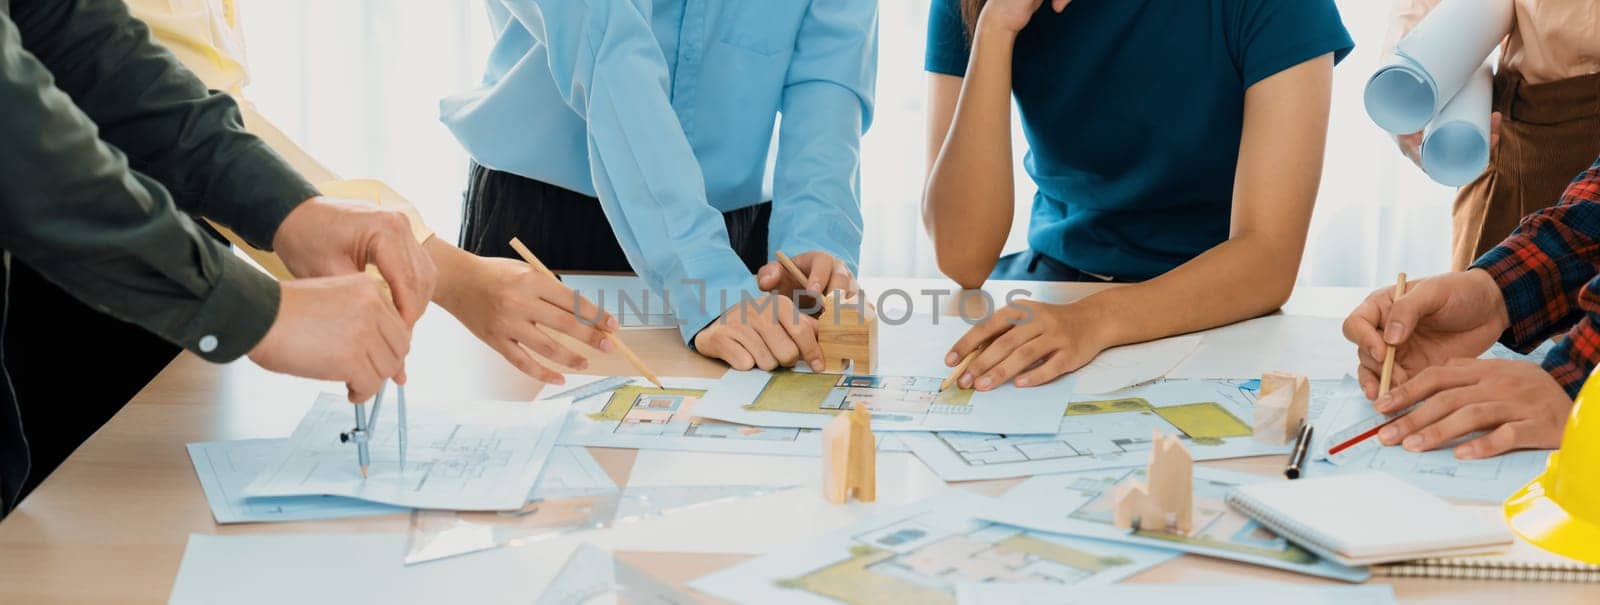 Professional architect team plans to build eco house at meeting table with green design document and architectural equipment scatter around. Living and design concept. Closeup. Delineation.